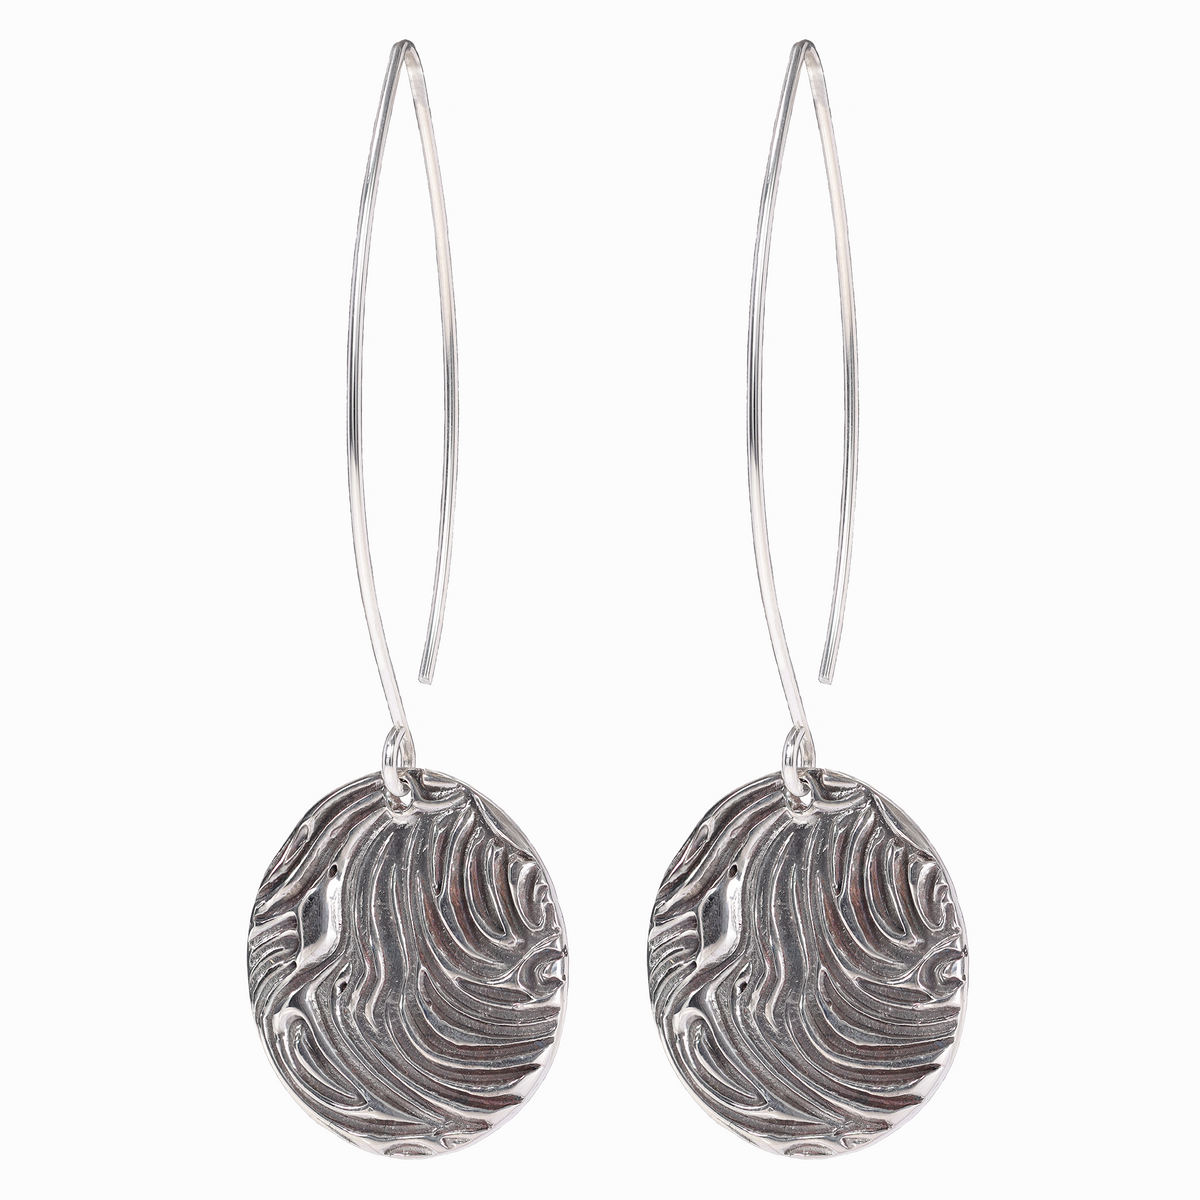 Wind Textured Large Sterling Silver Earrings on Long Ear Wires